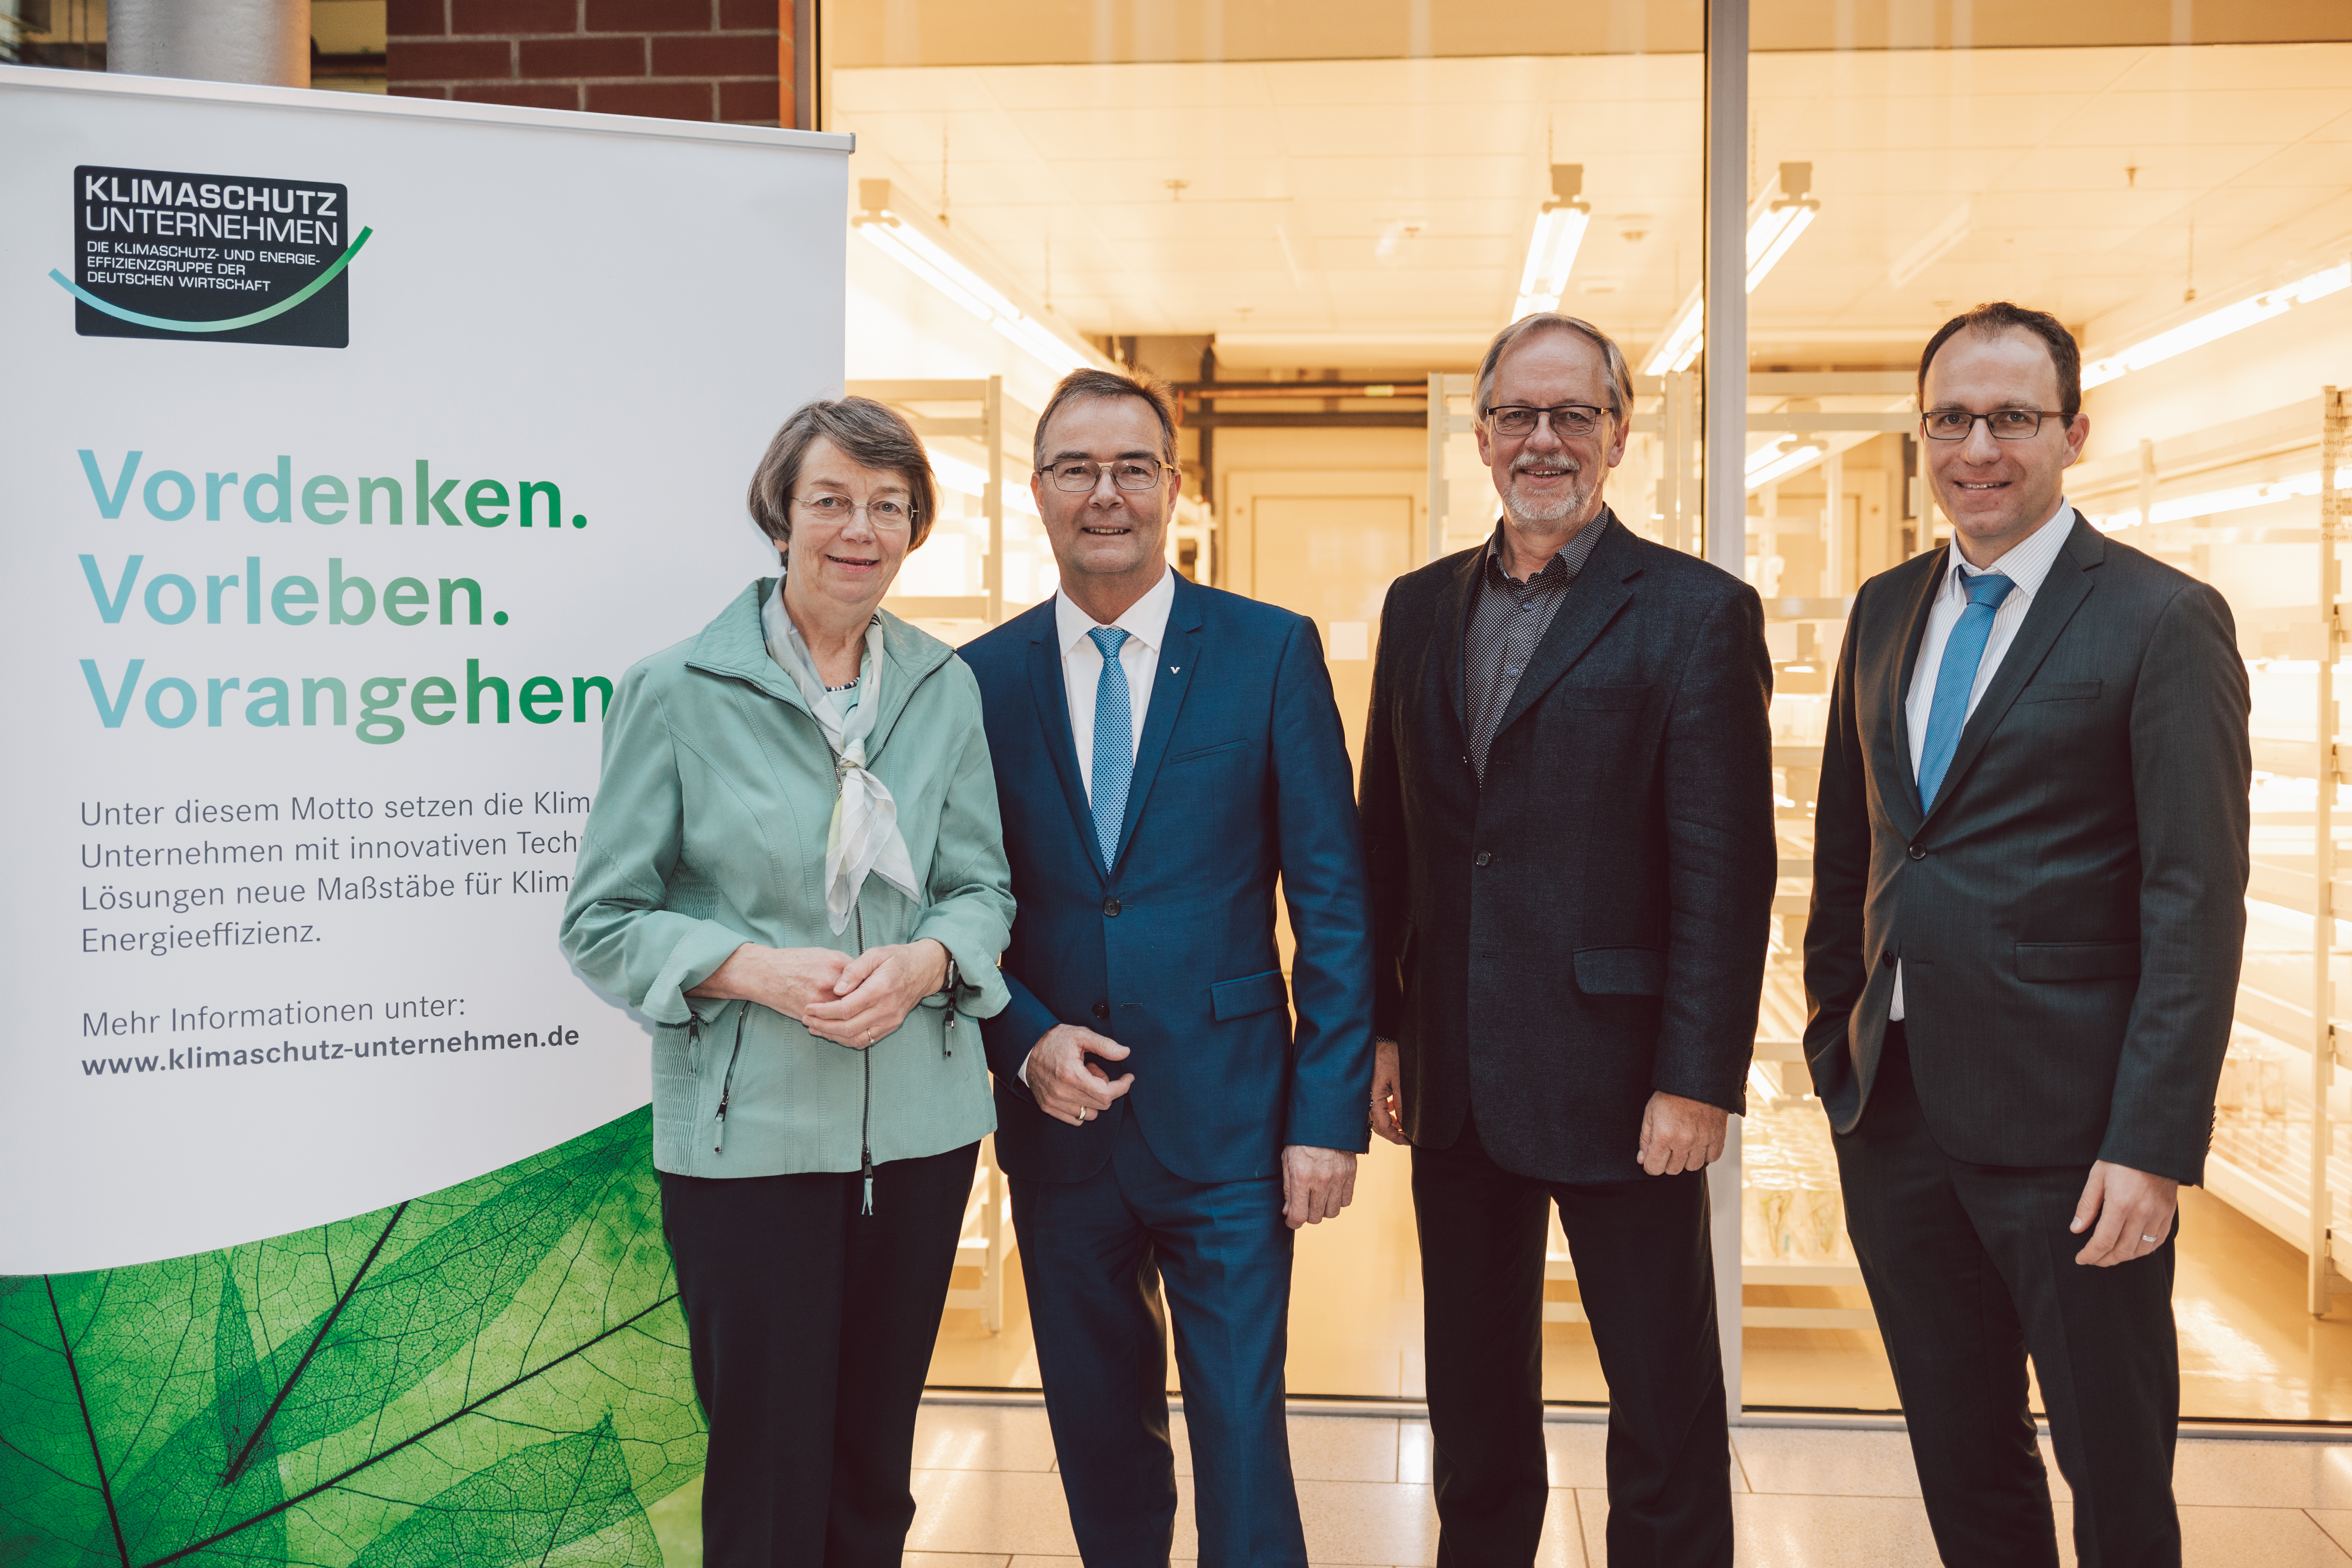 The previous Executive Board (from left to right) Dr. Jutta Zeddies (KWS), Jörg Schmidt (Viessmann Werke), Jan Eschke (Worlée-Chemie) and the Managing Director of the Climate Protection Company Association Wolfgang Saam.